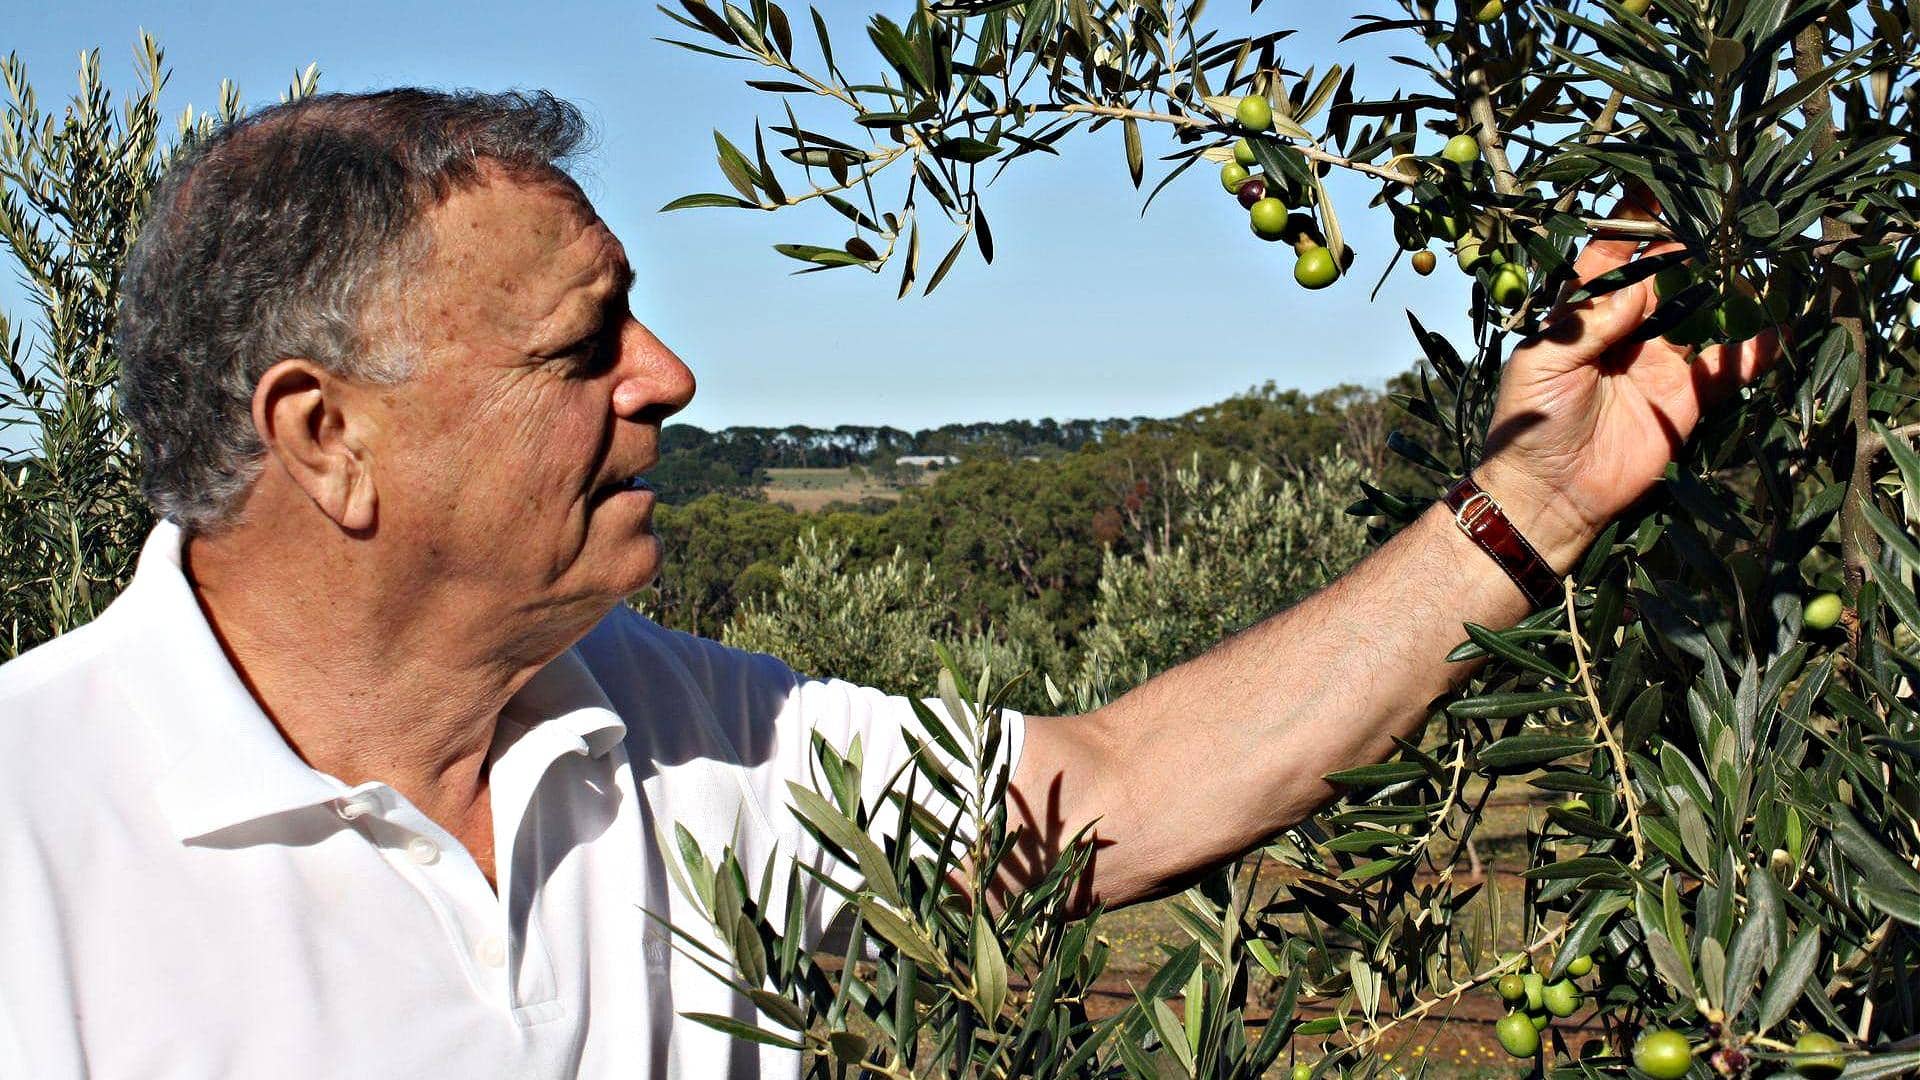 australia-and-new-zealand-business-profiles-production-in-victoria-taralinga-estate-celebrates-tradition-while-embracing-innovation-olive-oil-times